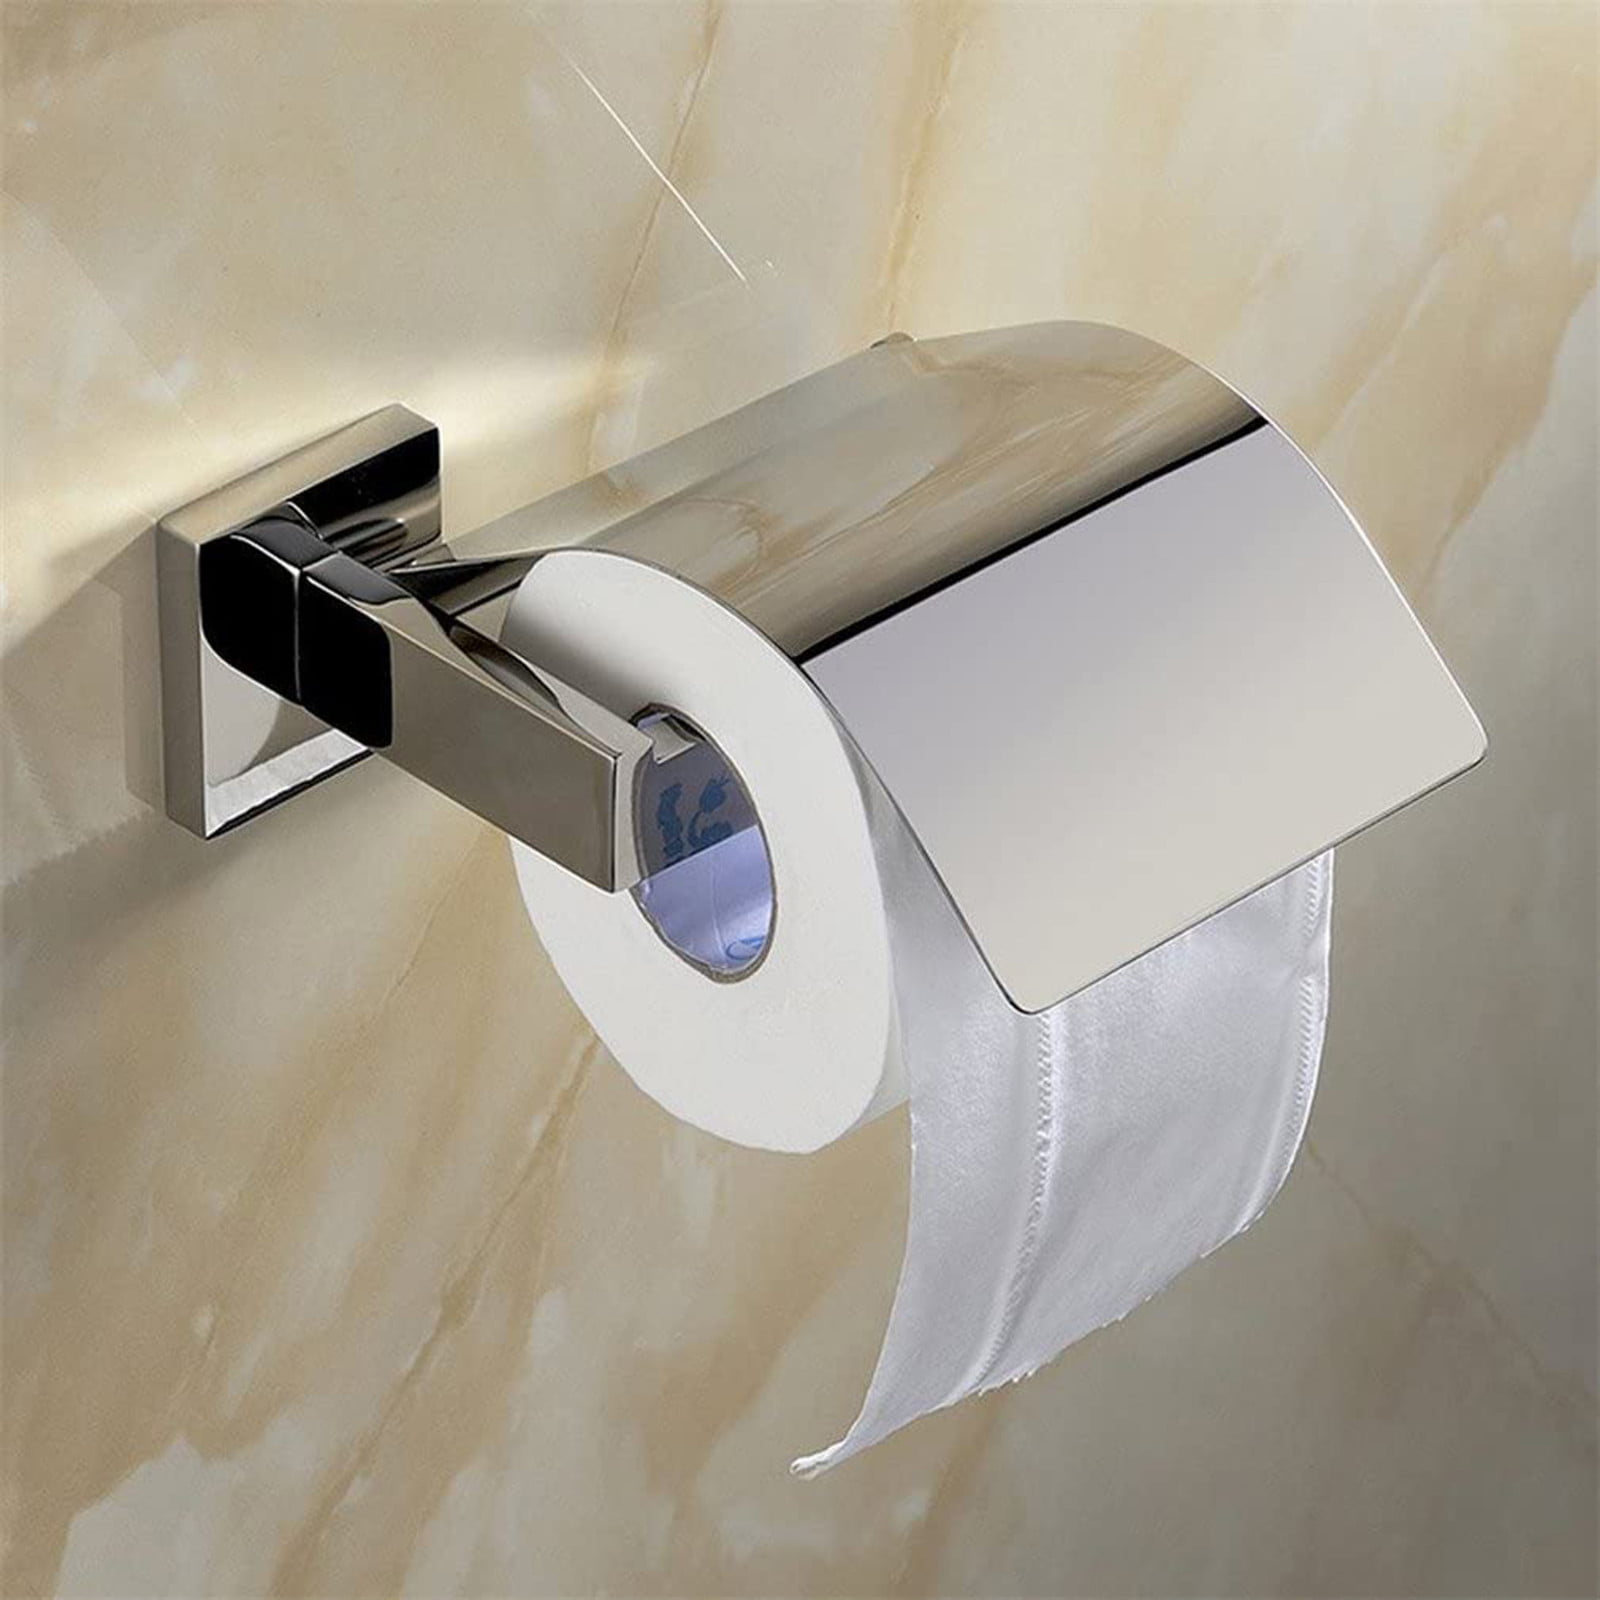 2 x Stainless Steel Toilet Roll Paper Holder Wall Mount Bathroom Self Adhesive 